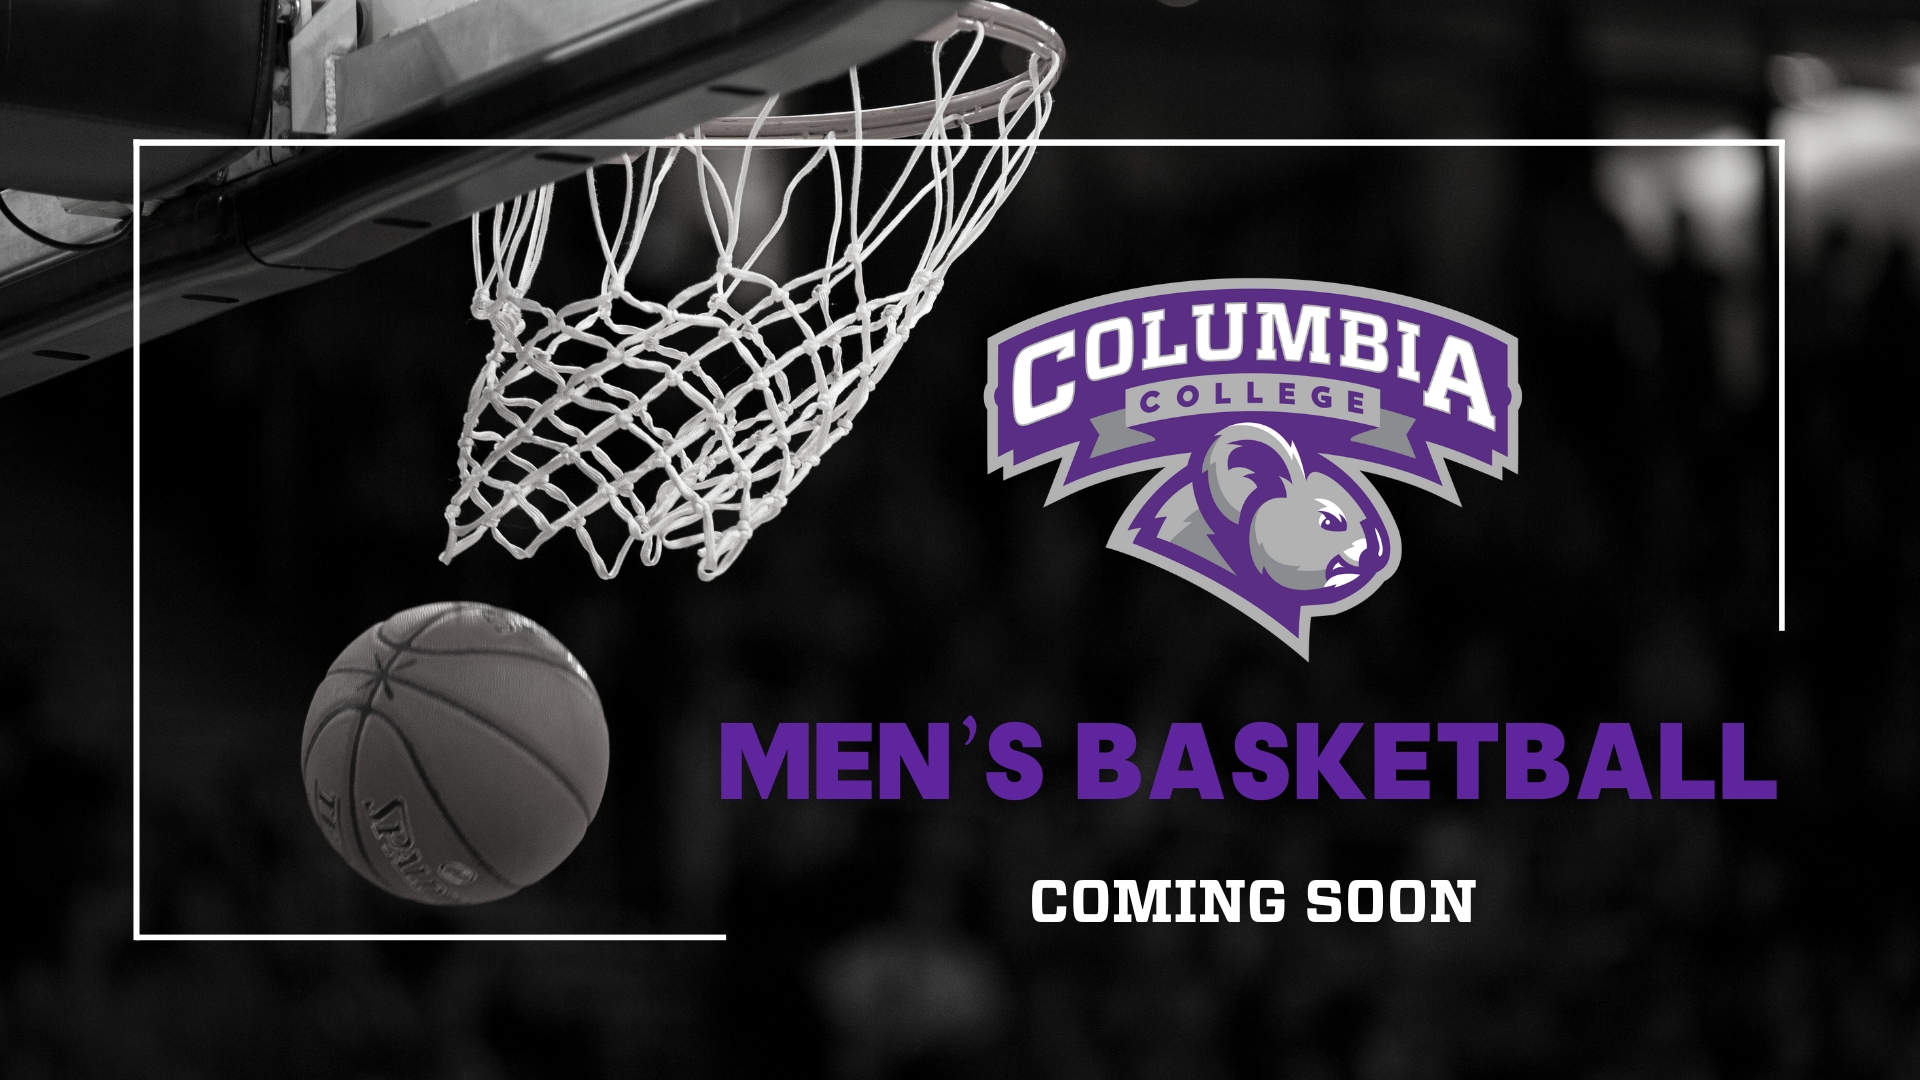 Men’s Basketball Added to Columbia College Athletics